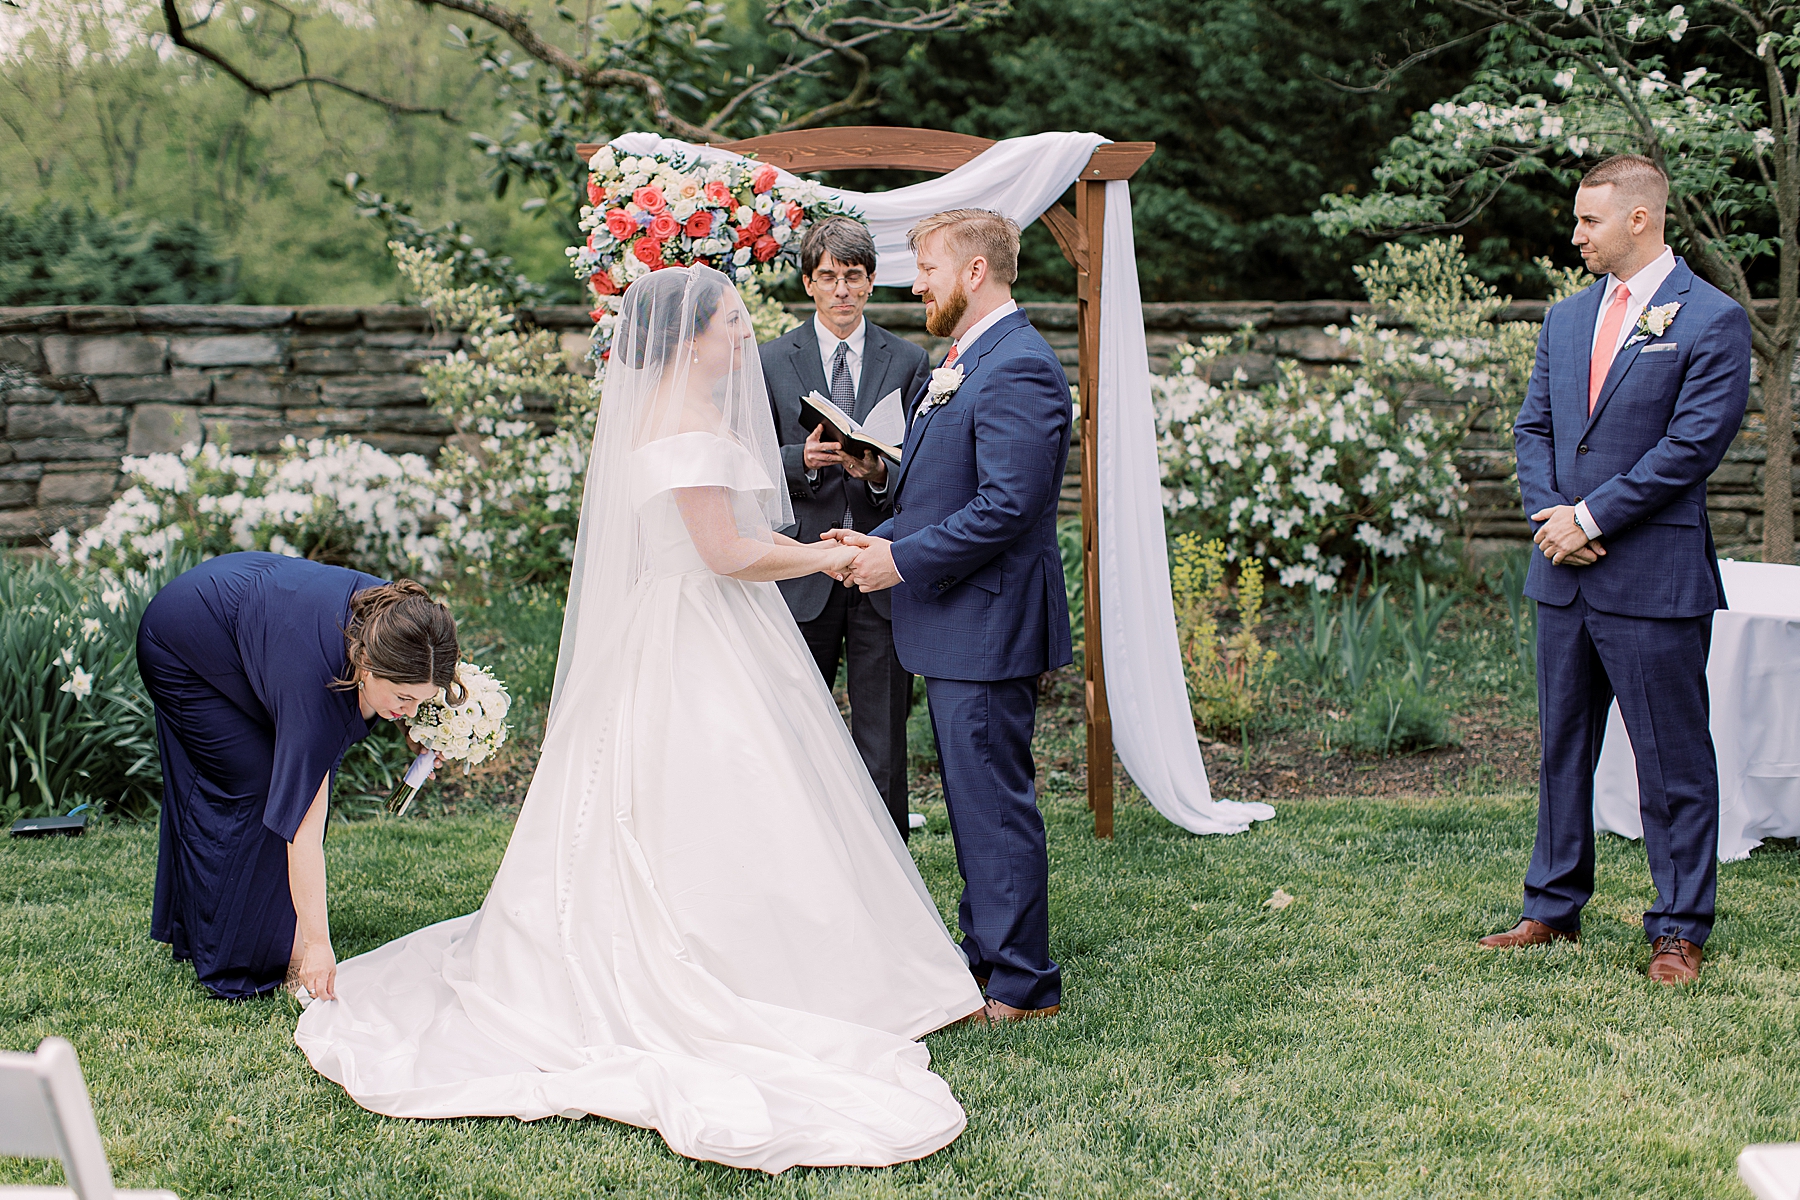 couple exchanges vows by arbor on lawn at Bellevue Hall